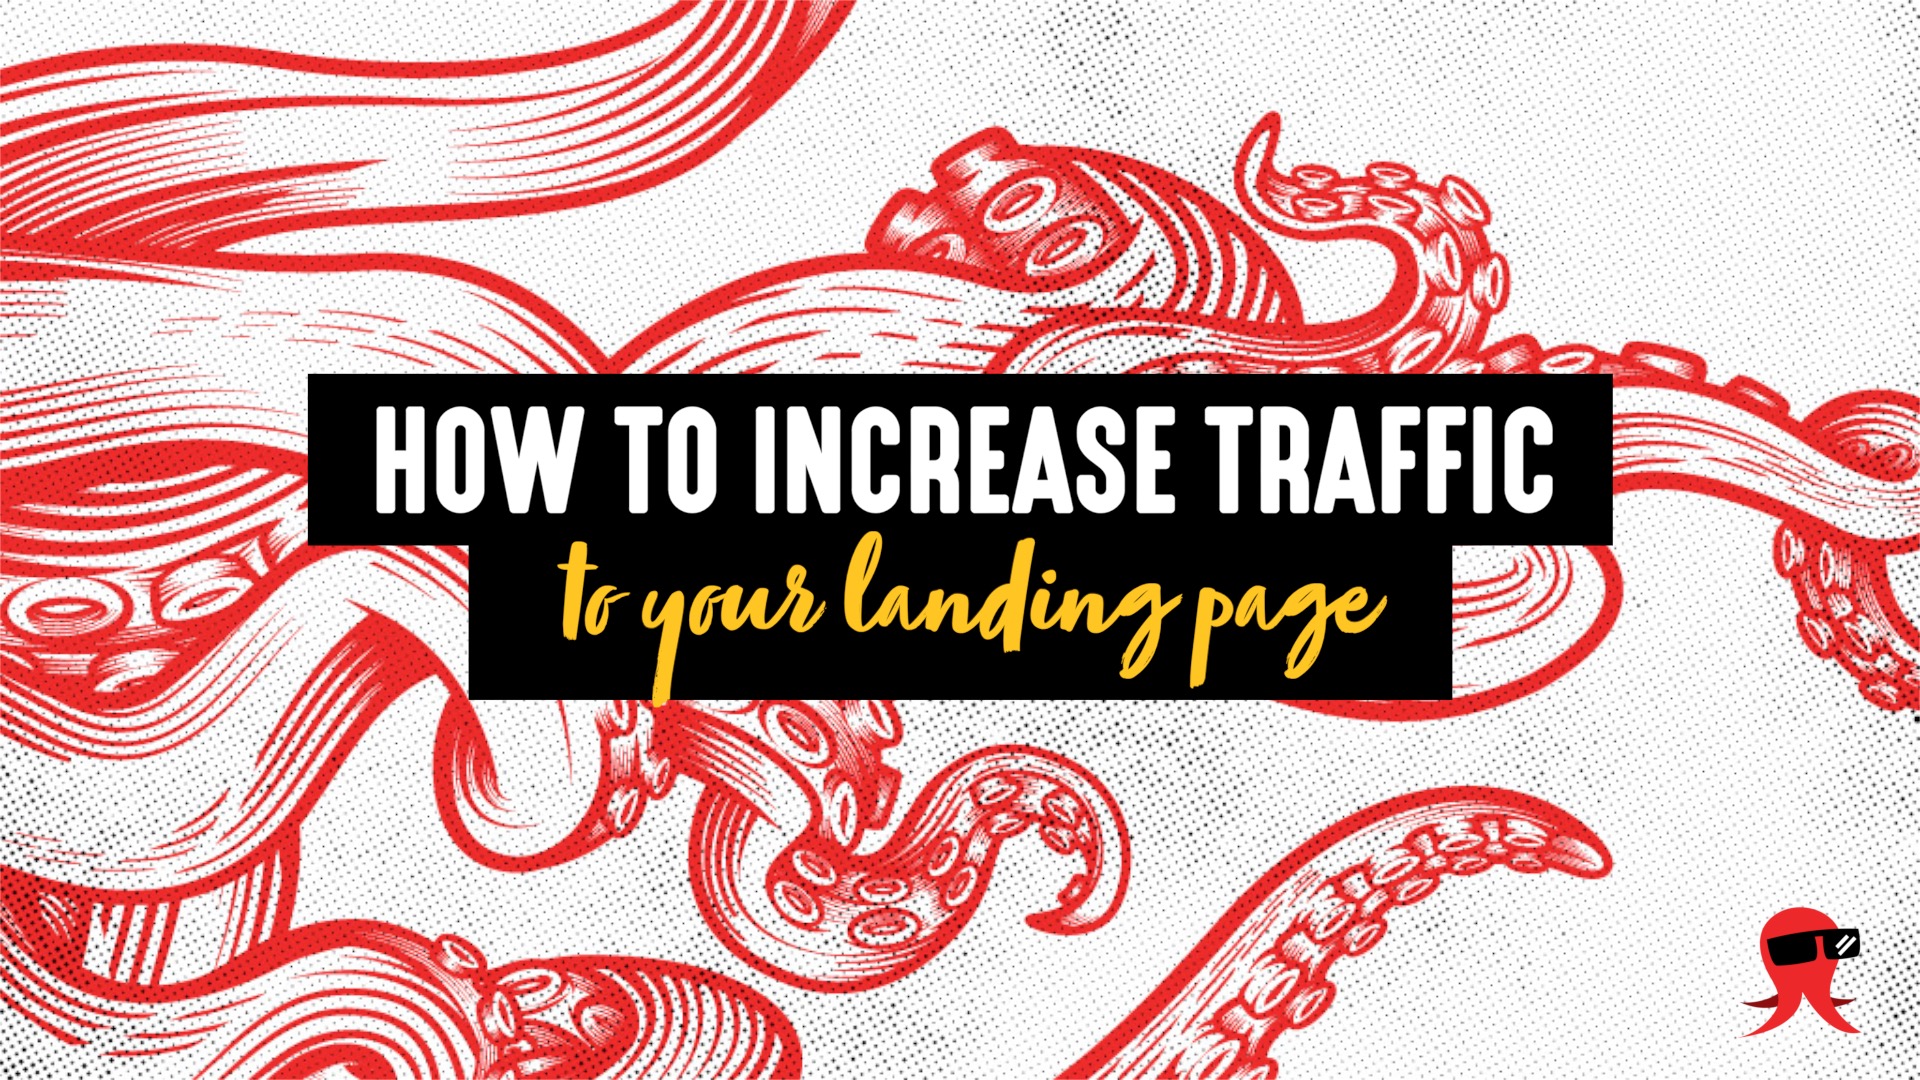 How to Increase Traffic to Your Landing Page